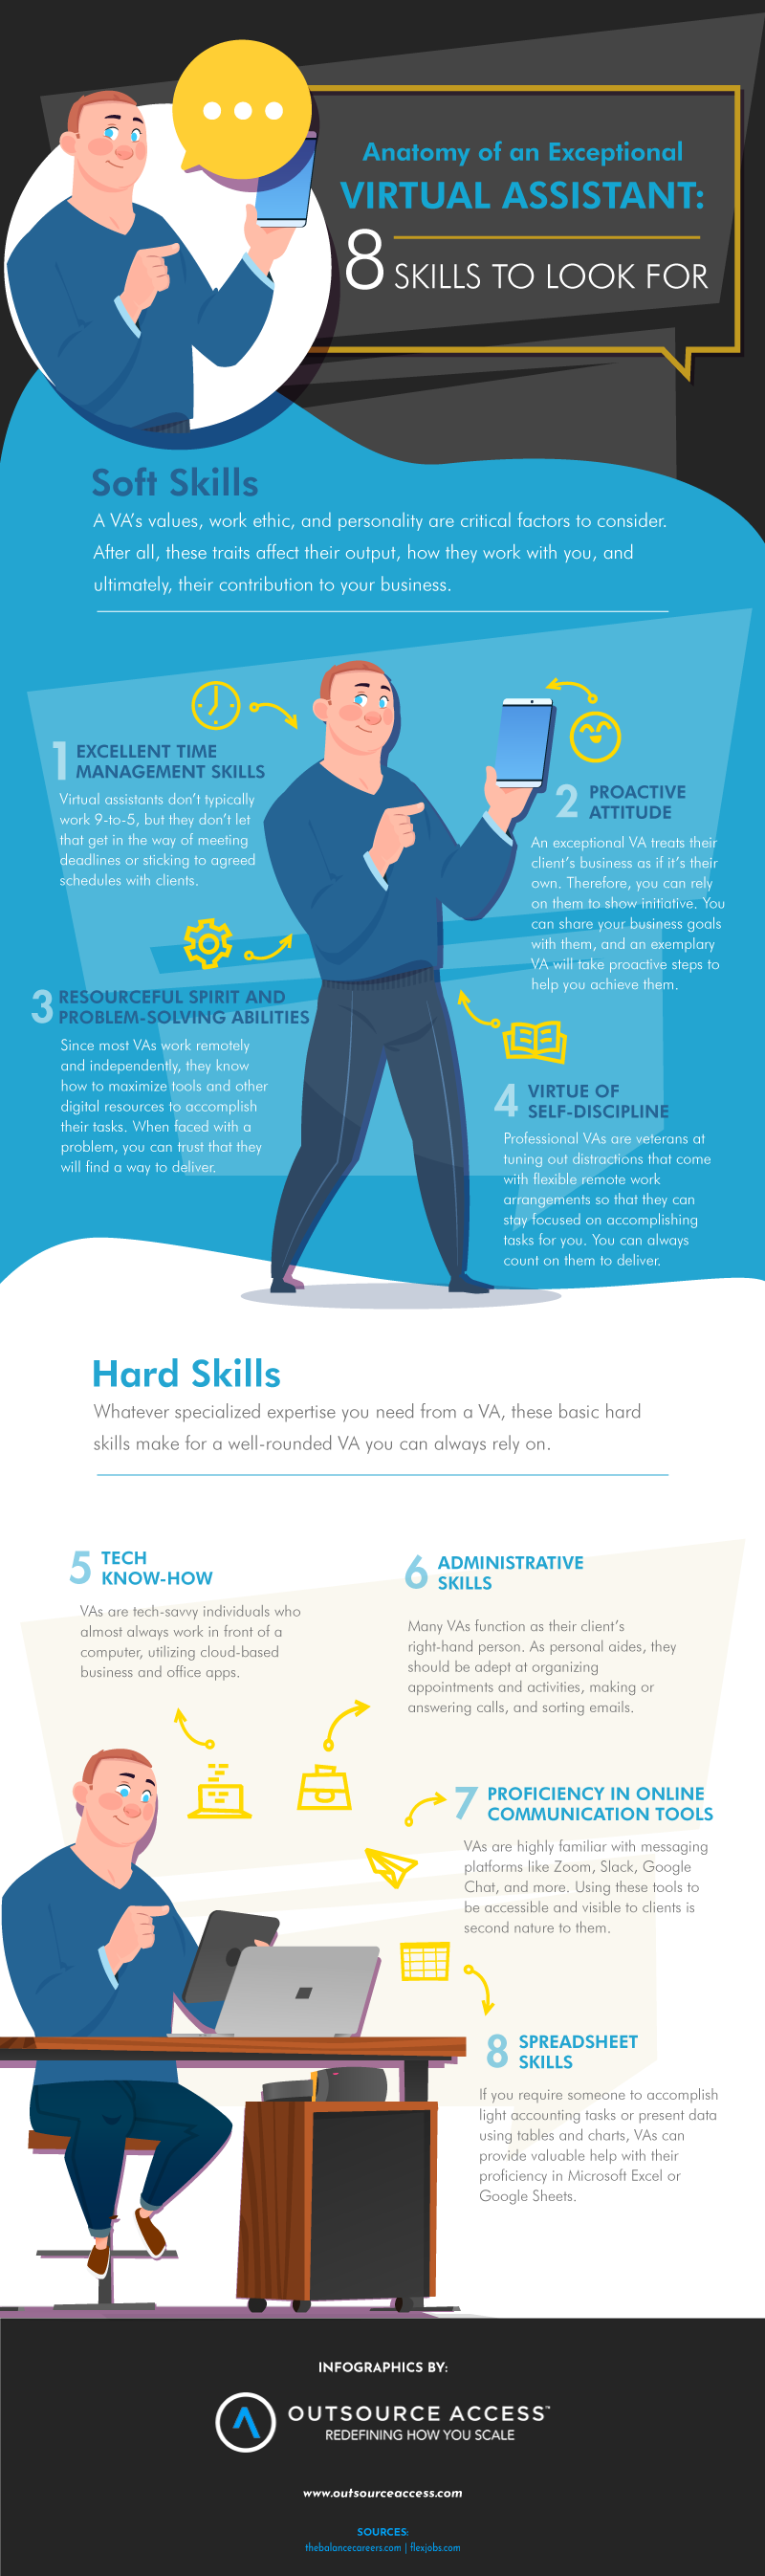 Anatomy of an Exceptional Virtual Assistant: 8 Skills to Look for 